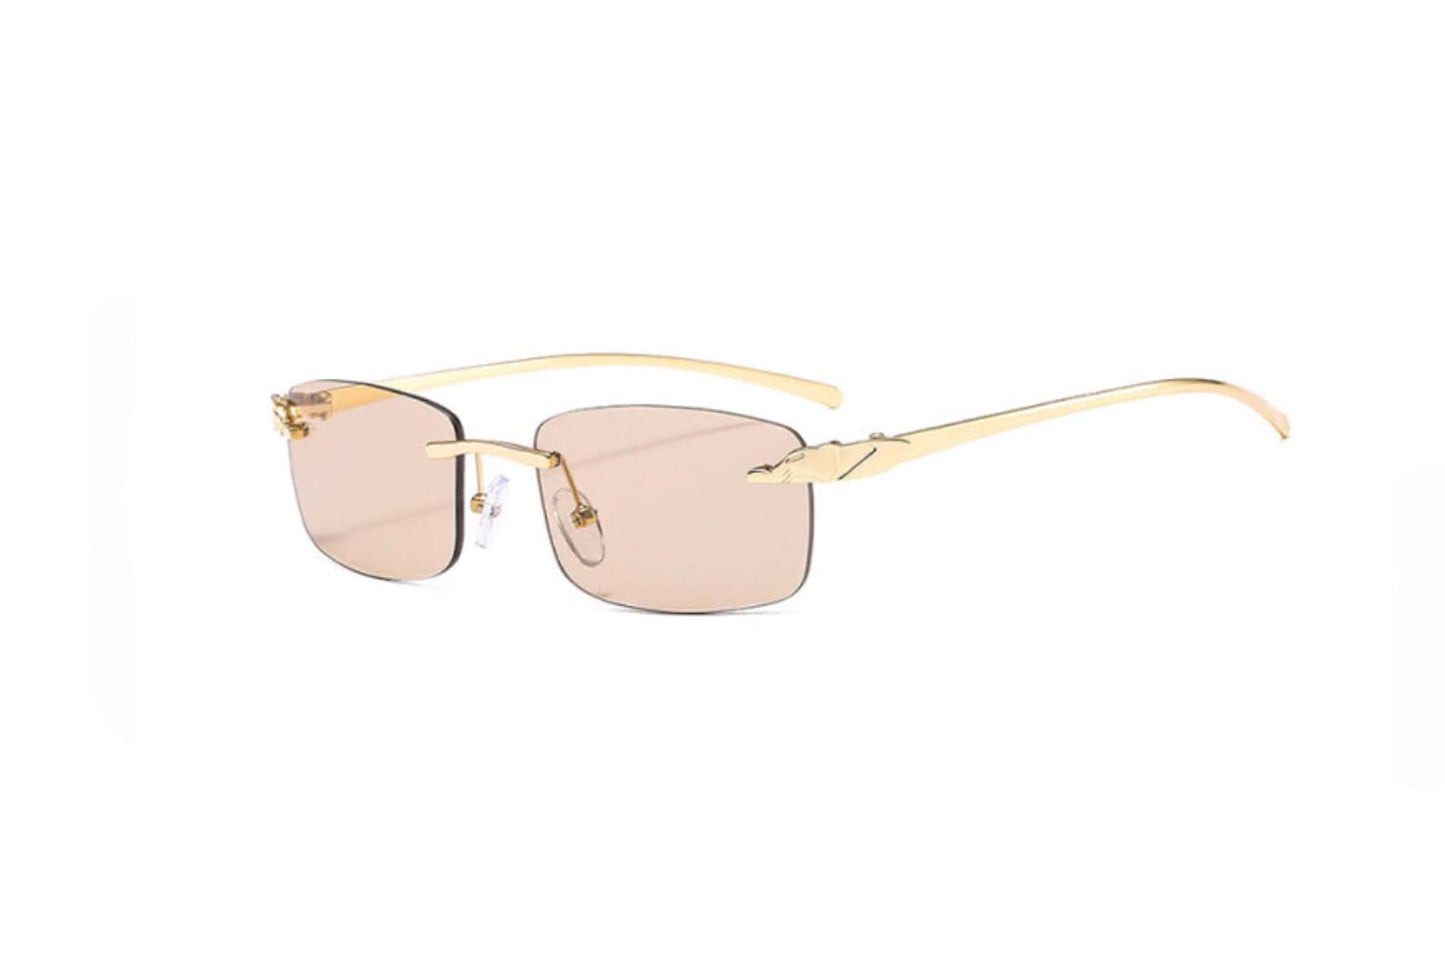 SUNGLASSES Panthere Beige